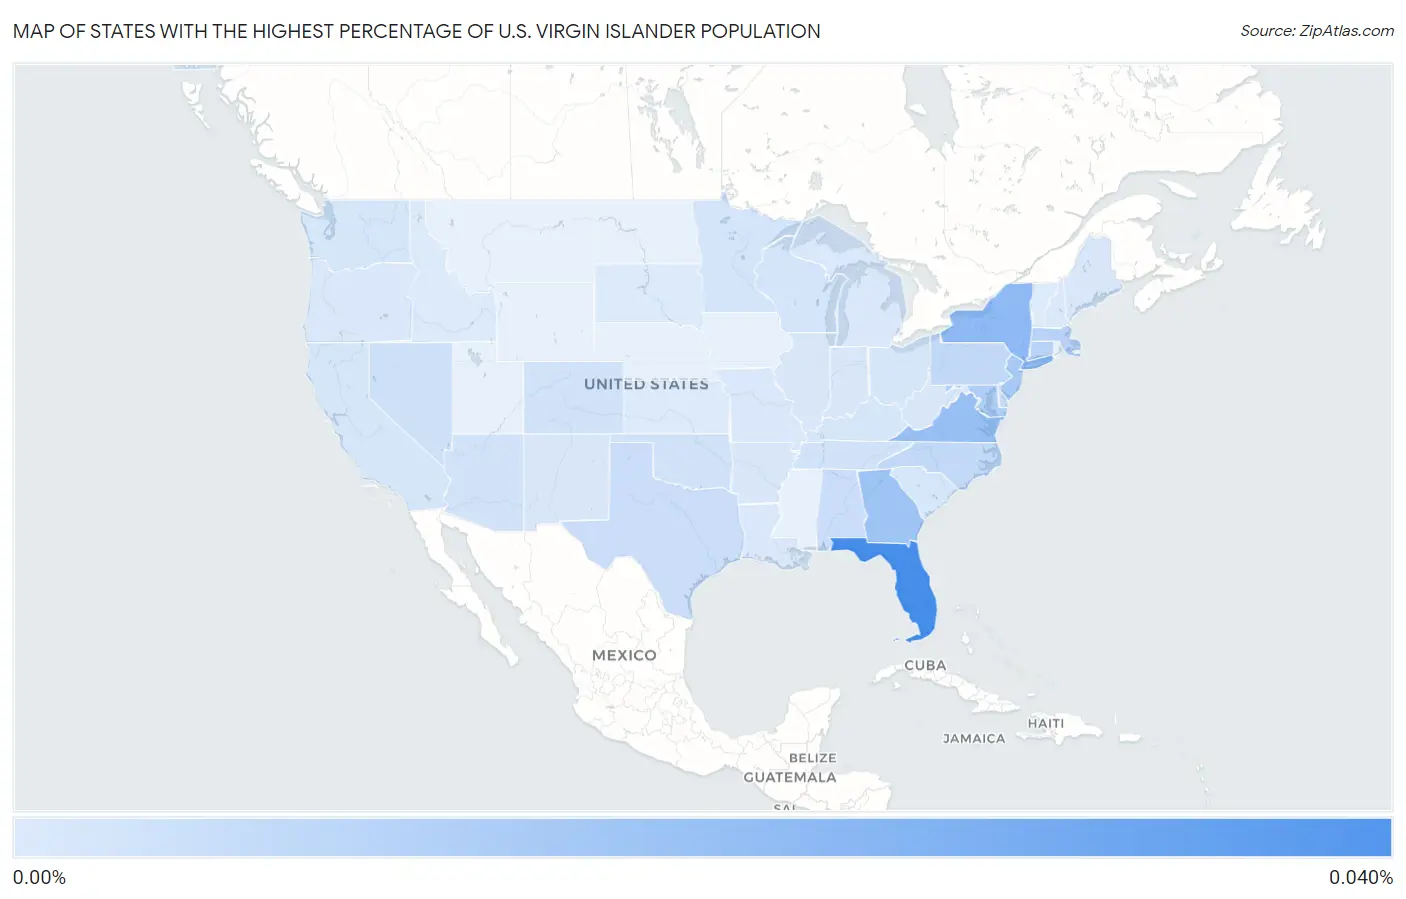 States with the Highest Percentage of U.S. Virgin Islander Population in the United States Map